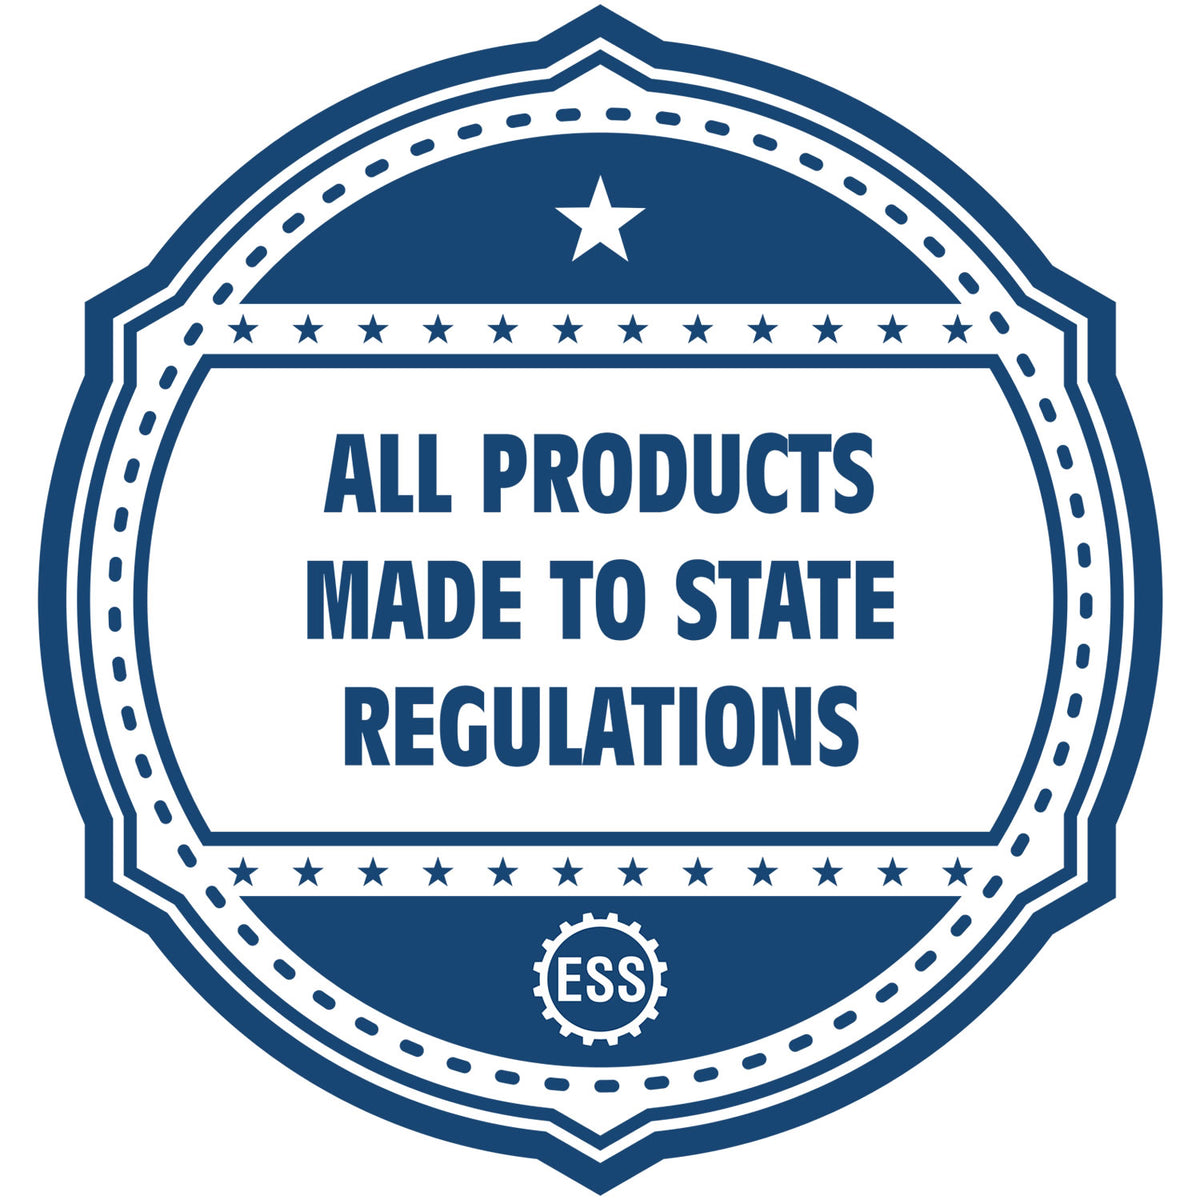 An icon or badge element for the Handheld New Jersey Architect Seal Embosser showing that this product is made in compliance with state regulations.